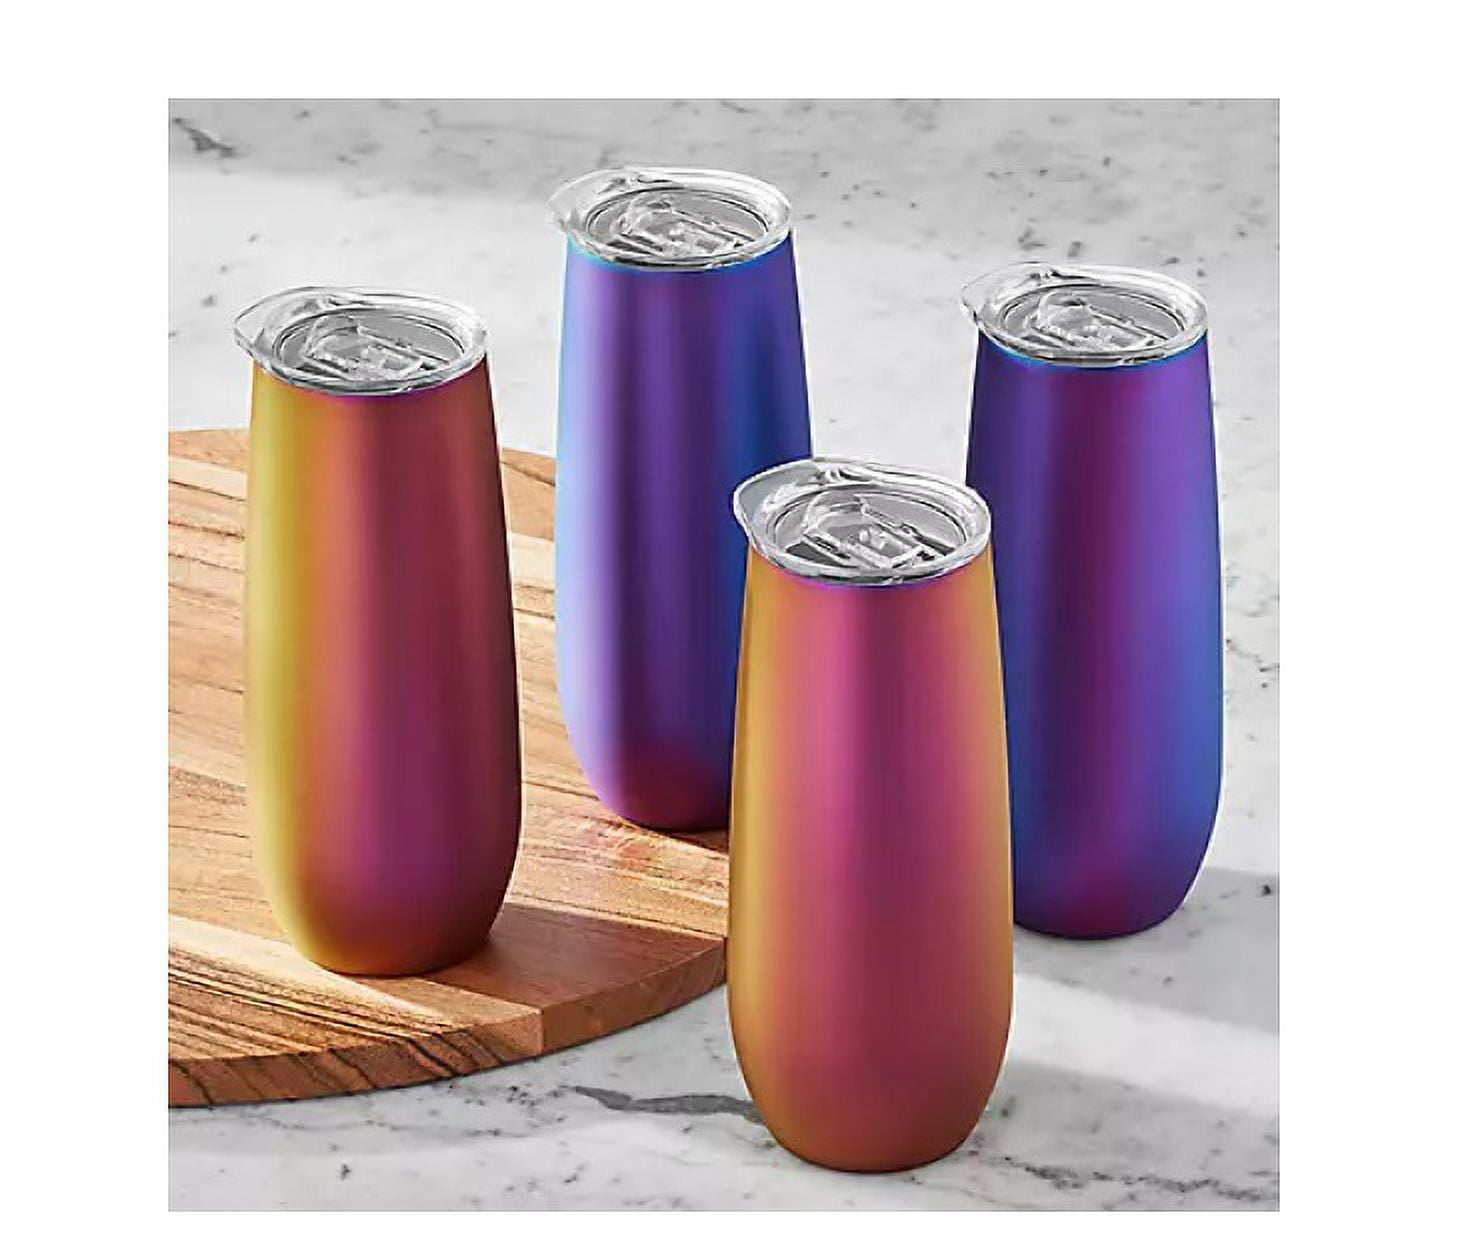 Member's Mark 4-Pack Tritan Hammered Tumblers with Lids and Straws Set NEW